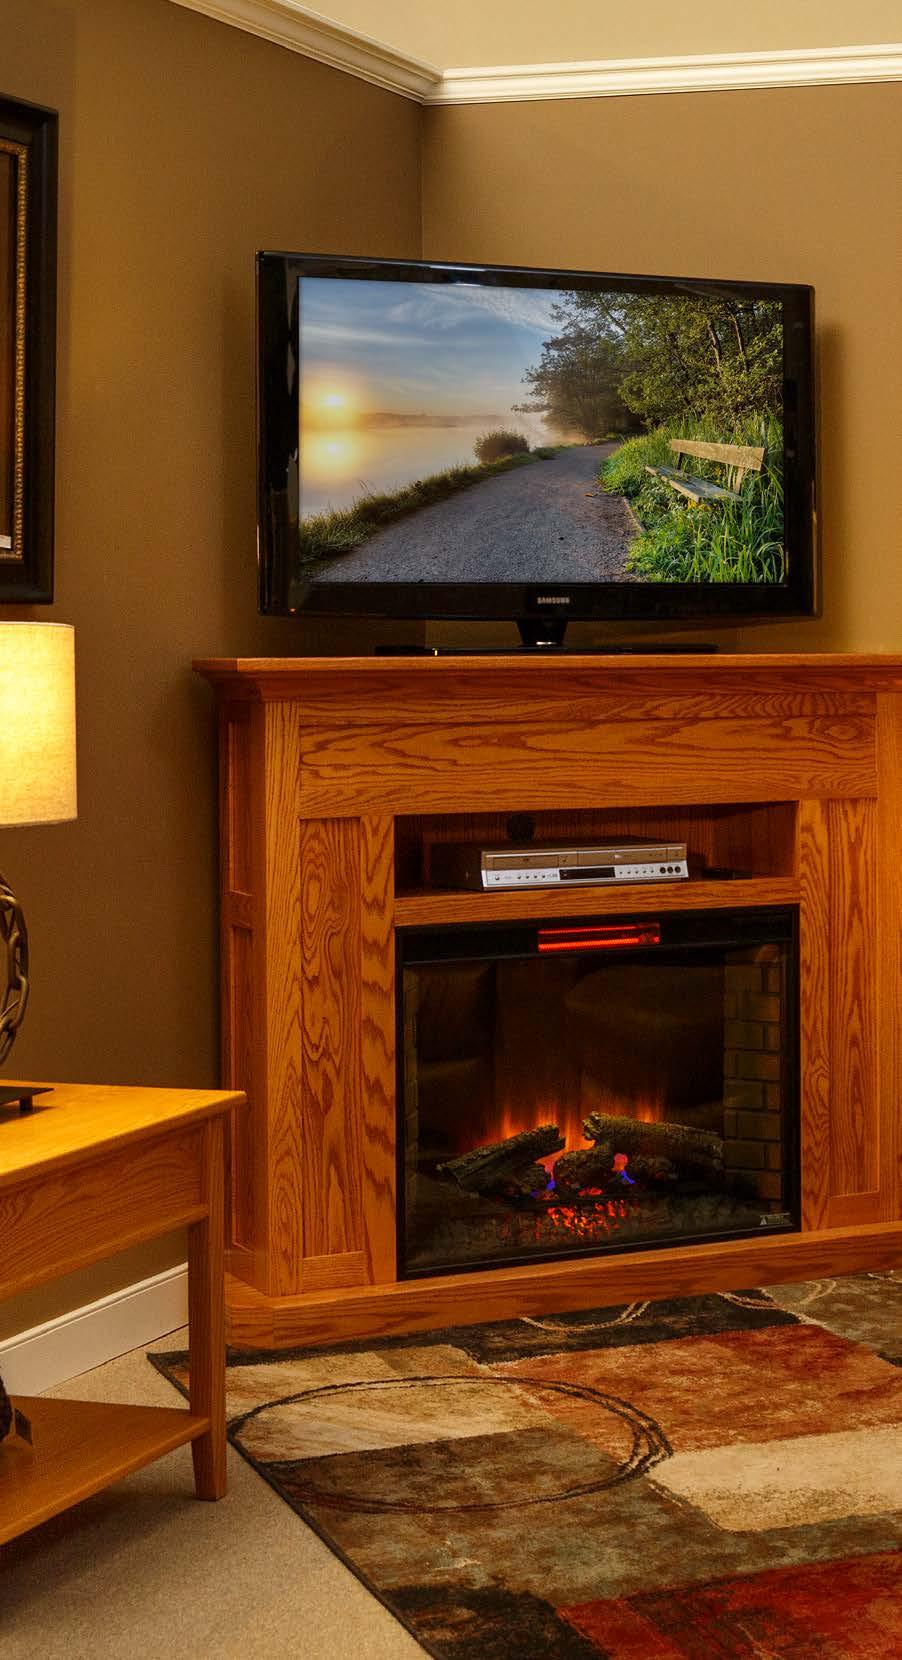 Fireplaces From the family room or living room to the bedroom or home office, our handcrafted fireplaces let you add warmth and style to any room in